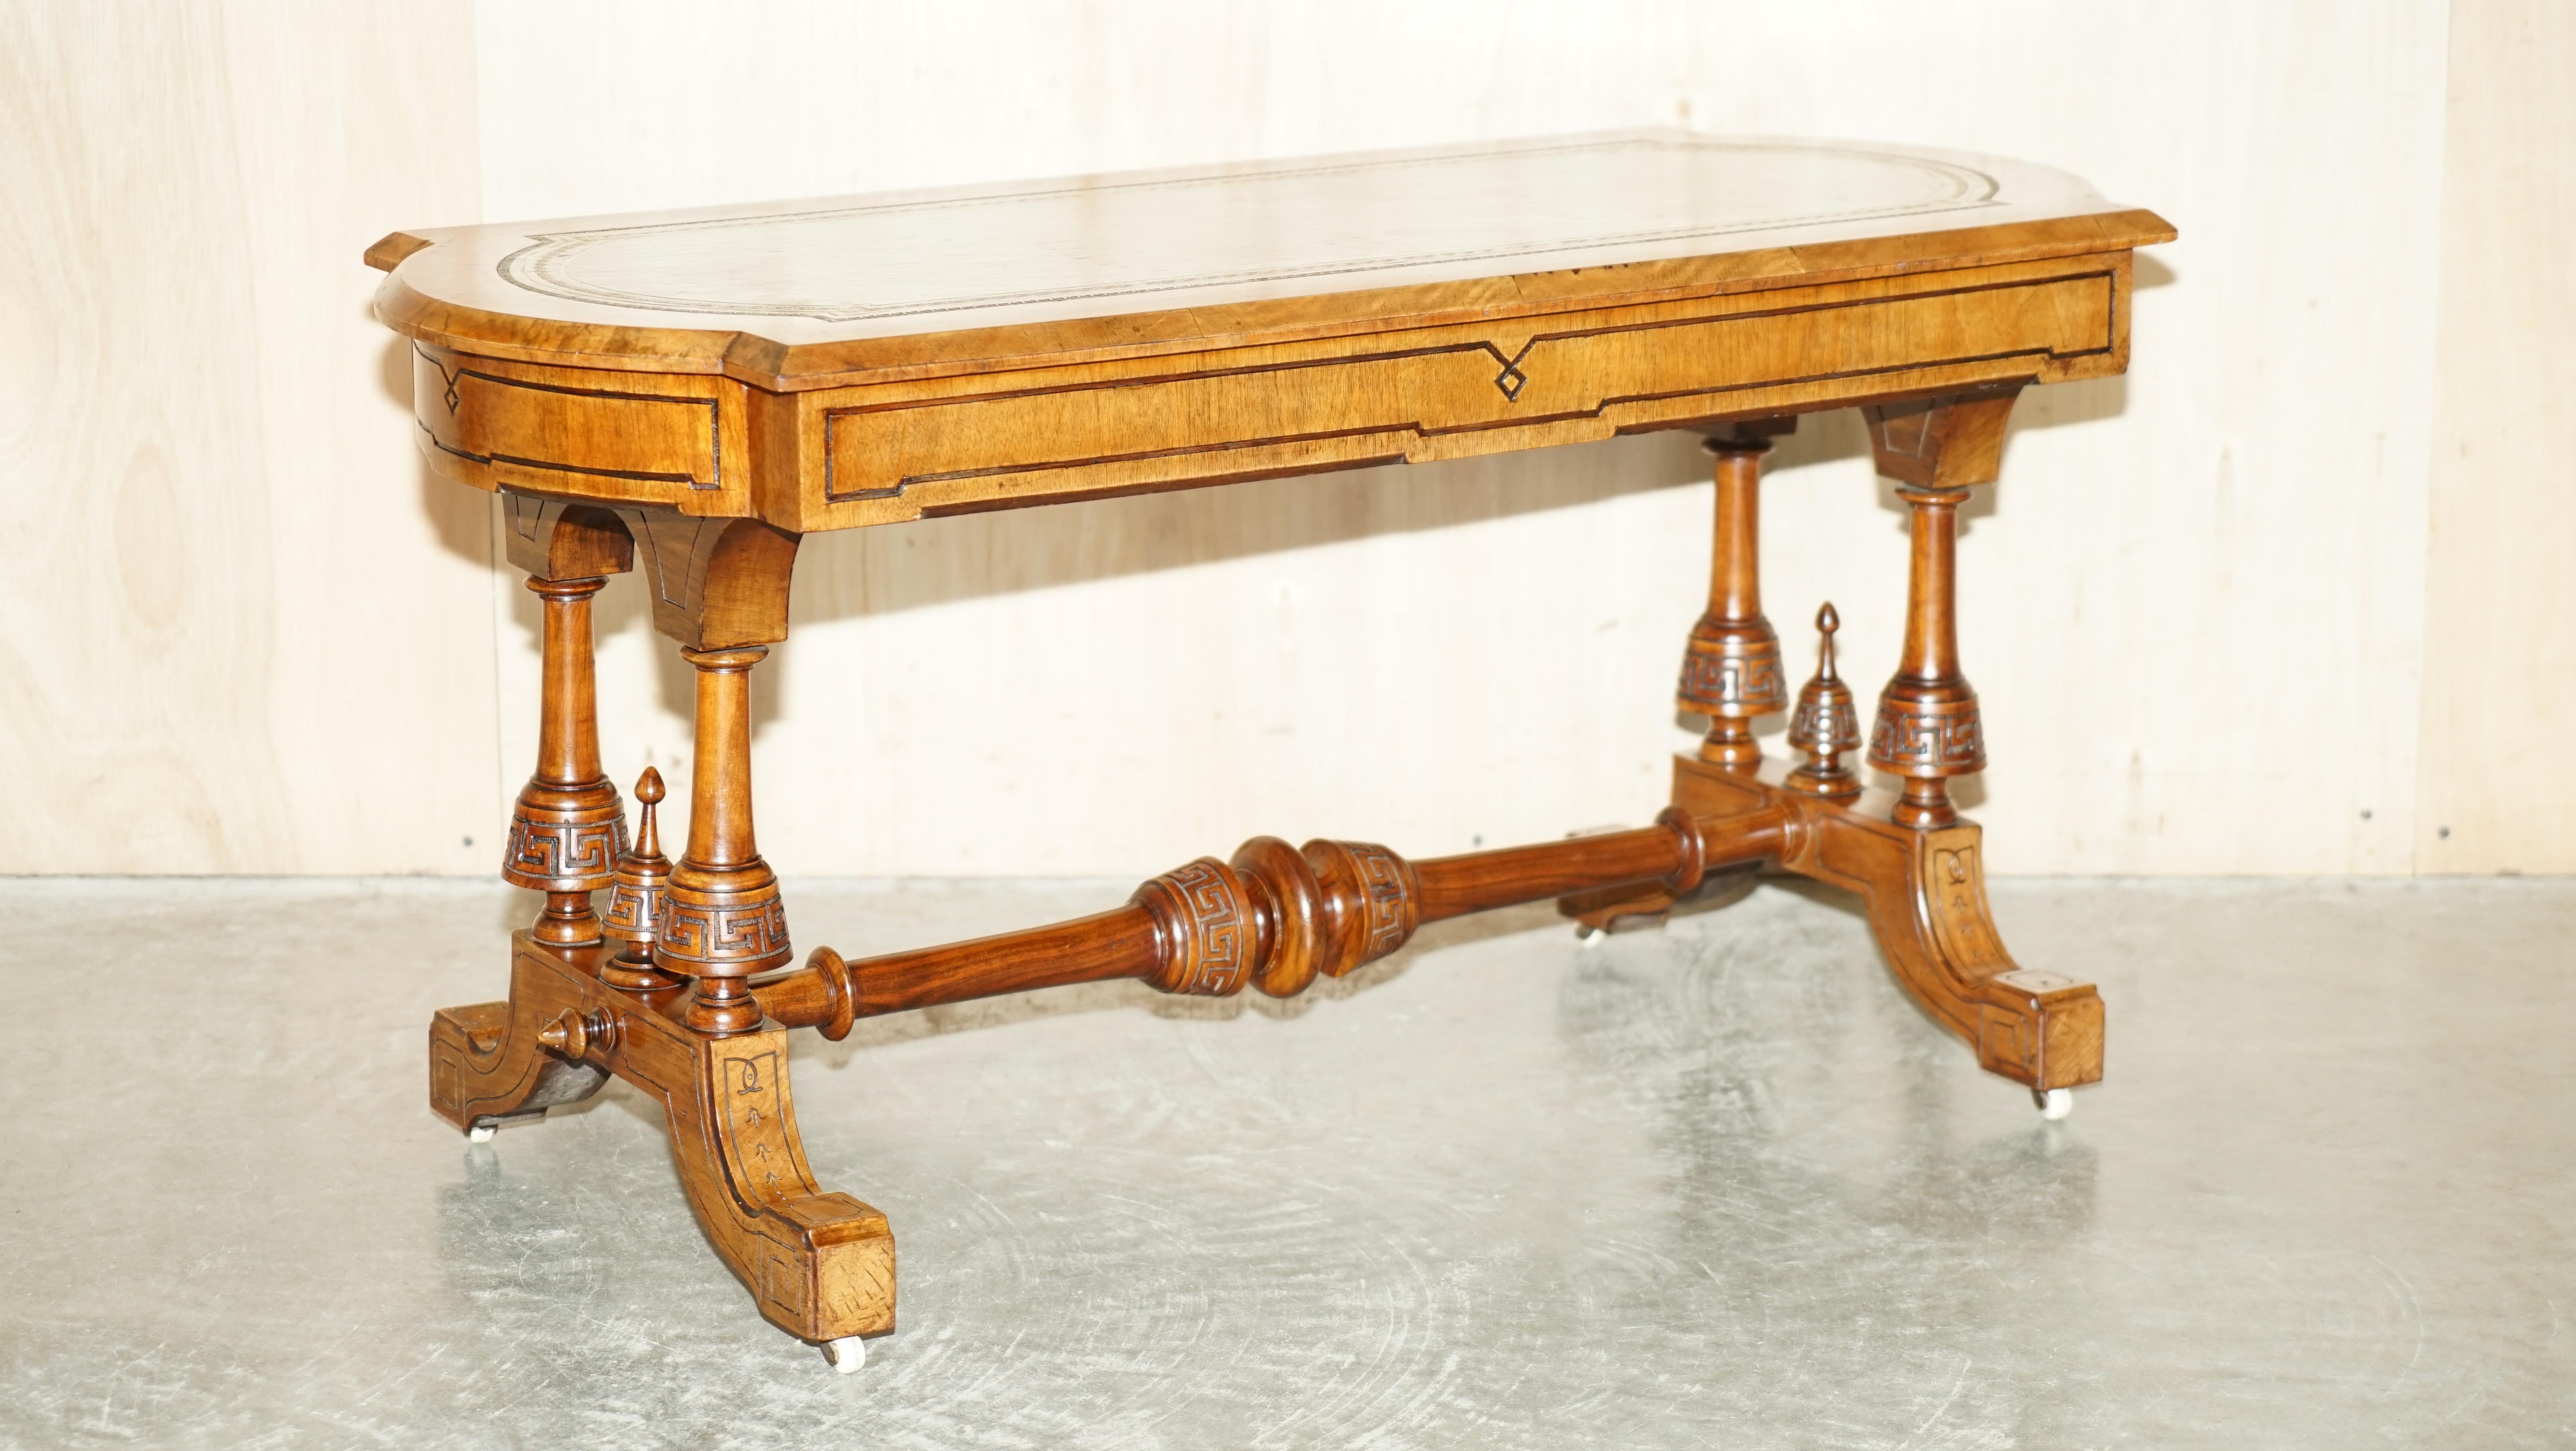 We are delighted to offer for sale this stunning heavily carved Aesthetic Movement style Burr & Burl Walnut coffee table with green Leather top 

A very good looking and well made table, this is super decorative and looks expensive and important